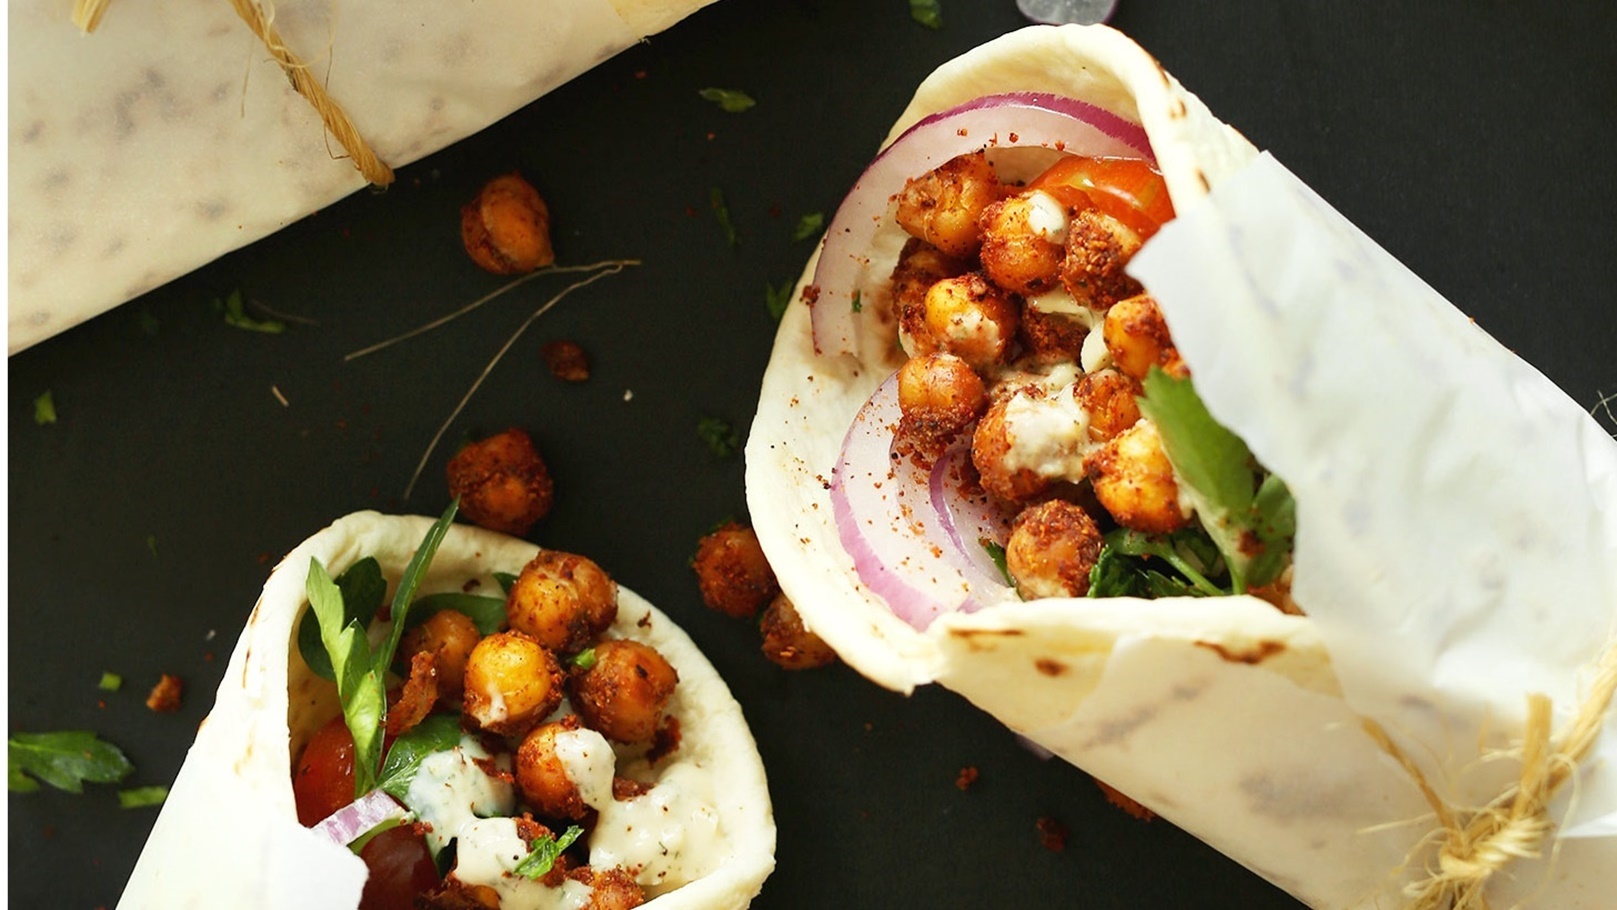 AMAZING-30-minute-HEALTHY-Chickpea-Shawarma-Wraps-with-a-simple-Garlic-Dill-Sauce-An-easy-weeknight-vegan-plantbased-meal-healthy-recipe-mediterranean-minimalistbaker